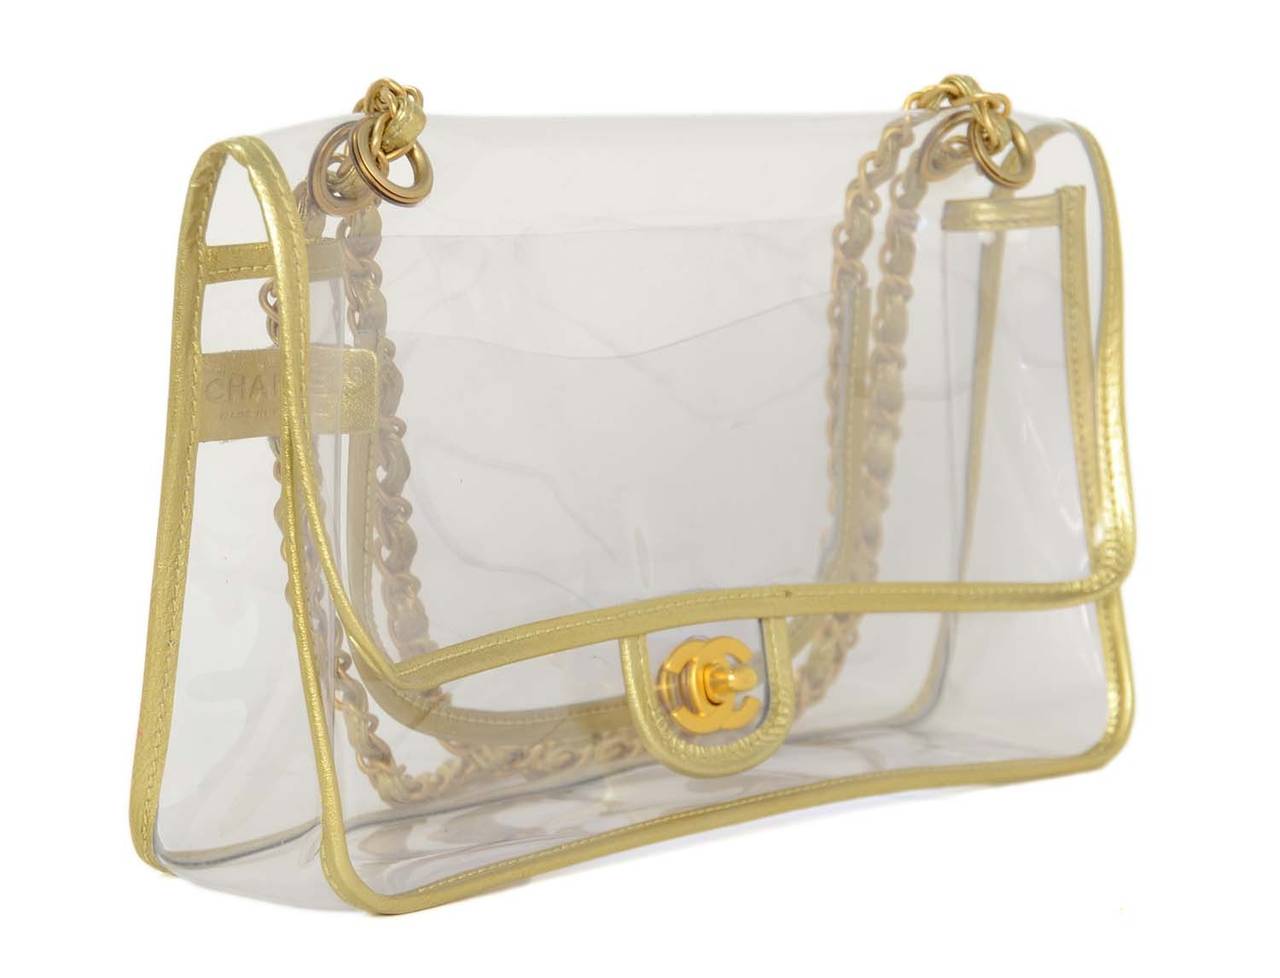 CHANEL Clear Flap Bag W/ Gold Metallic Trim & Brushed Gold Hardware c. 2007

    Made in: France
    Year of Production: 2007
    Color: Clear with gold trim
    Hardware: Brushed goldtone hardware
    Materials: Plastic with leather trim
   